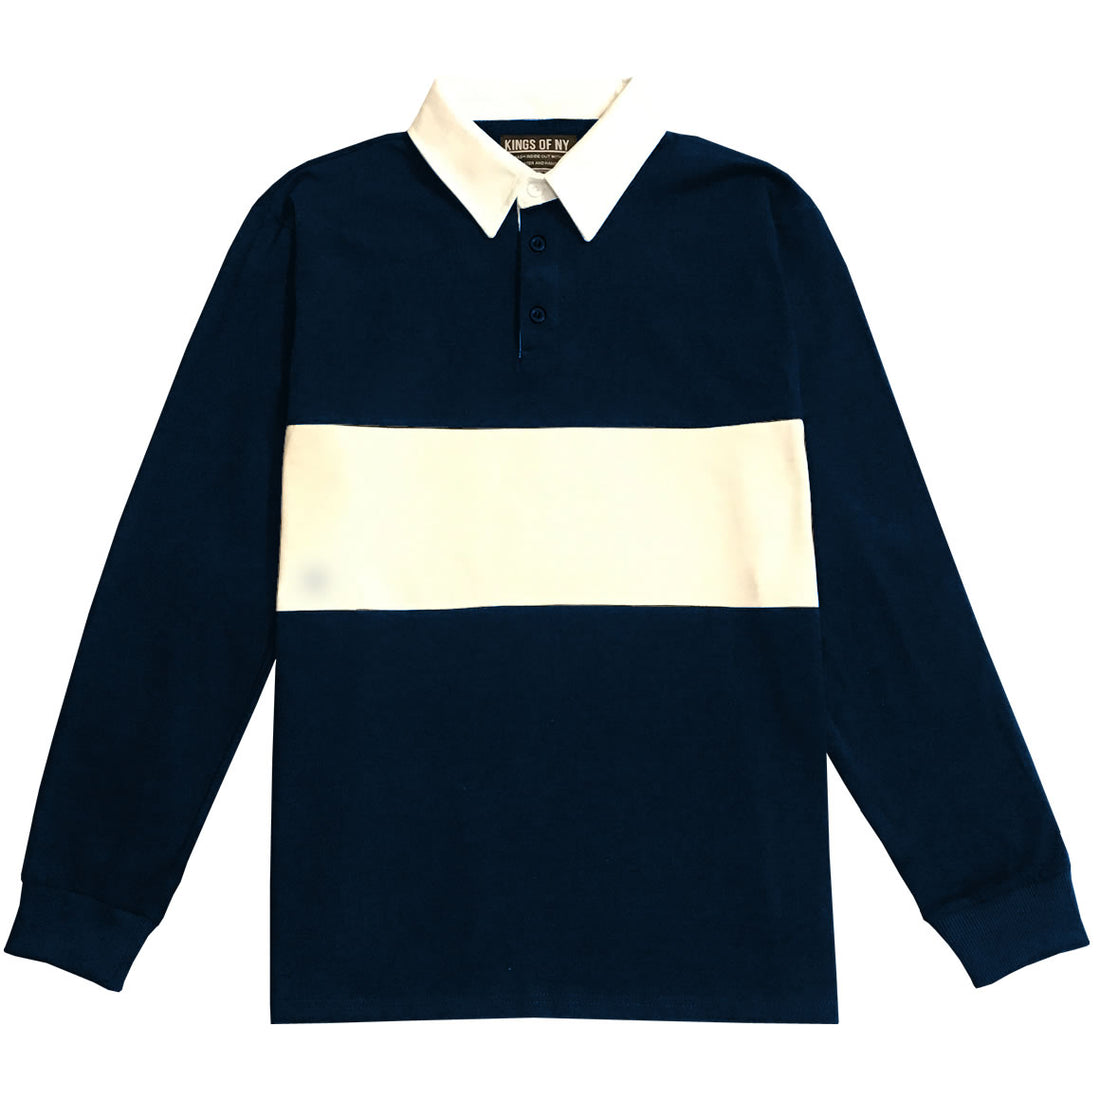 Mens Navy Blue and White Striped Long Sleeve Polo Rugby Shirt